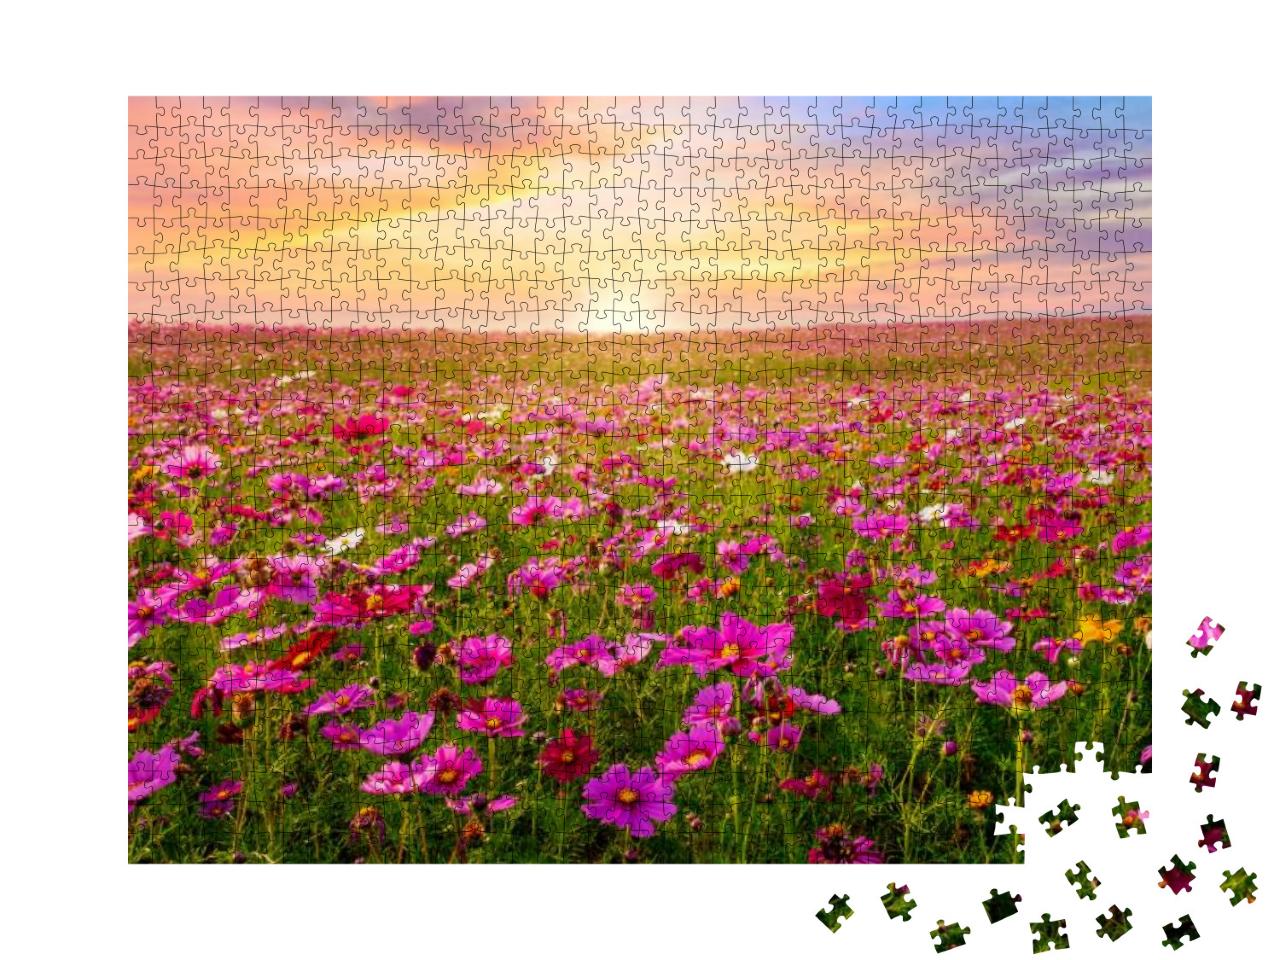 Beautiful & Amazing of Cosmos Flower Field Landscape in S... Jigsaw Puzzle with 1000 pieces